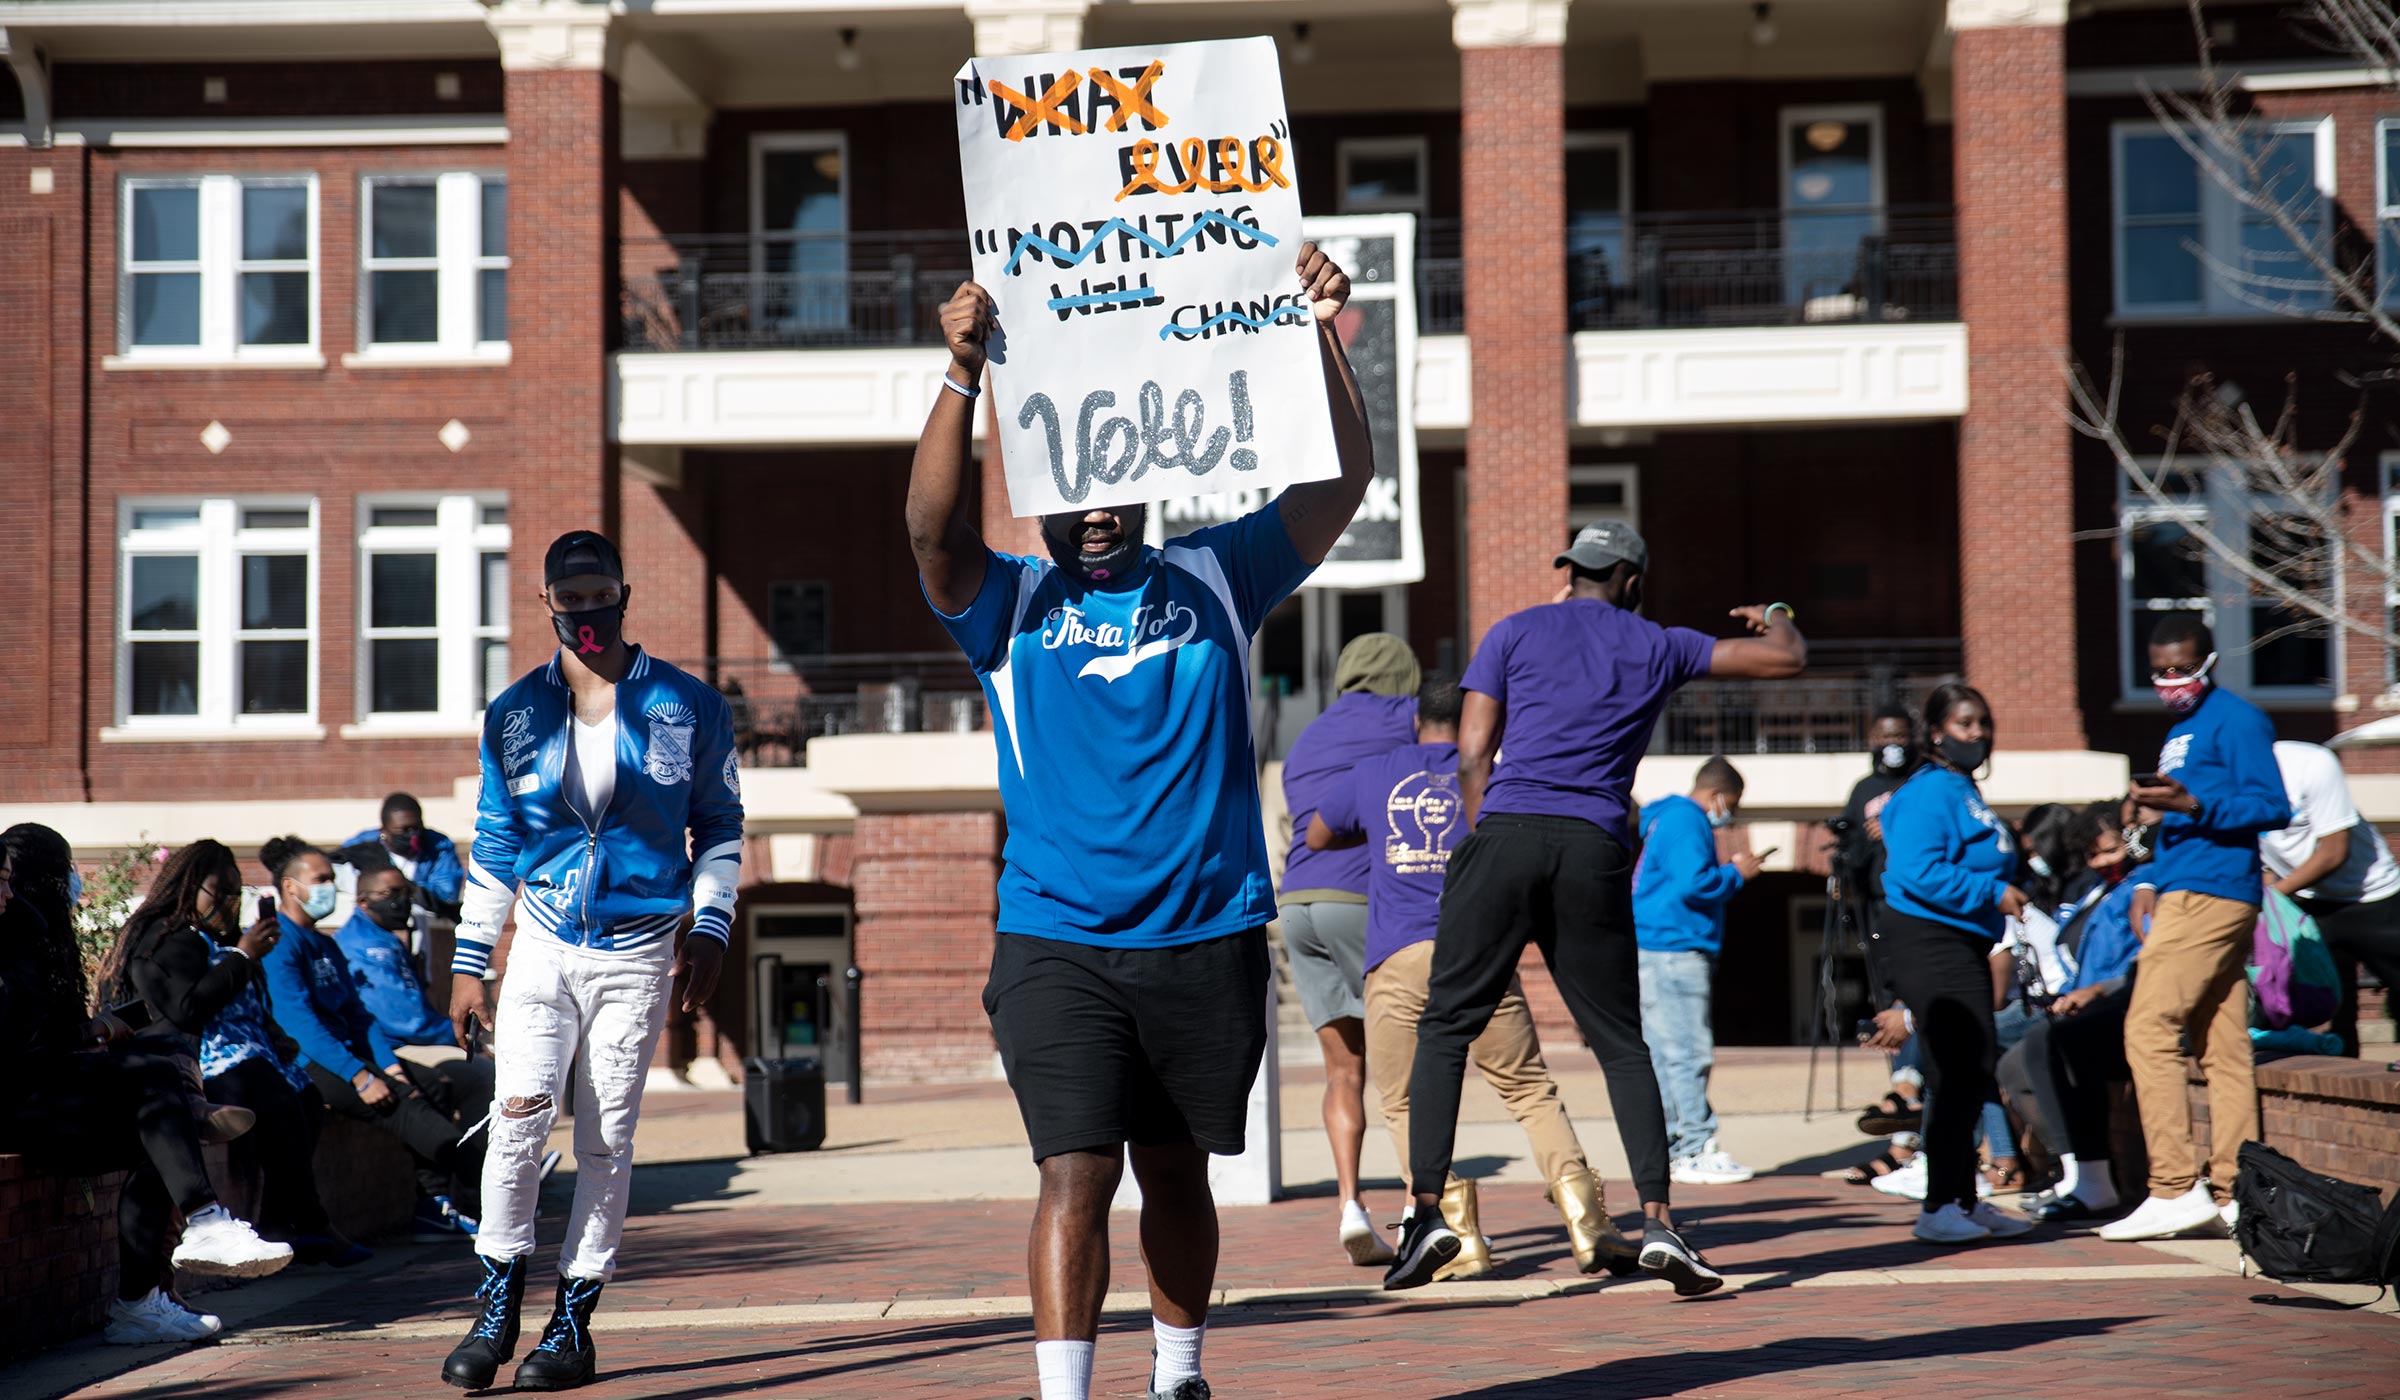 To help promote Election Day voting, fraternity members &quot;stroll off&quot; in front of the YMCA building holding signs encouraging voting.